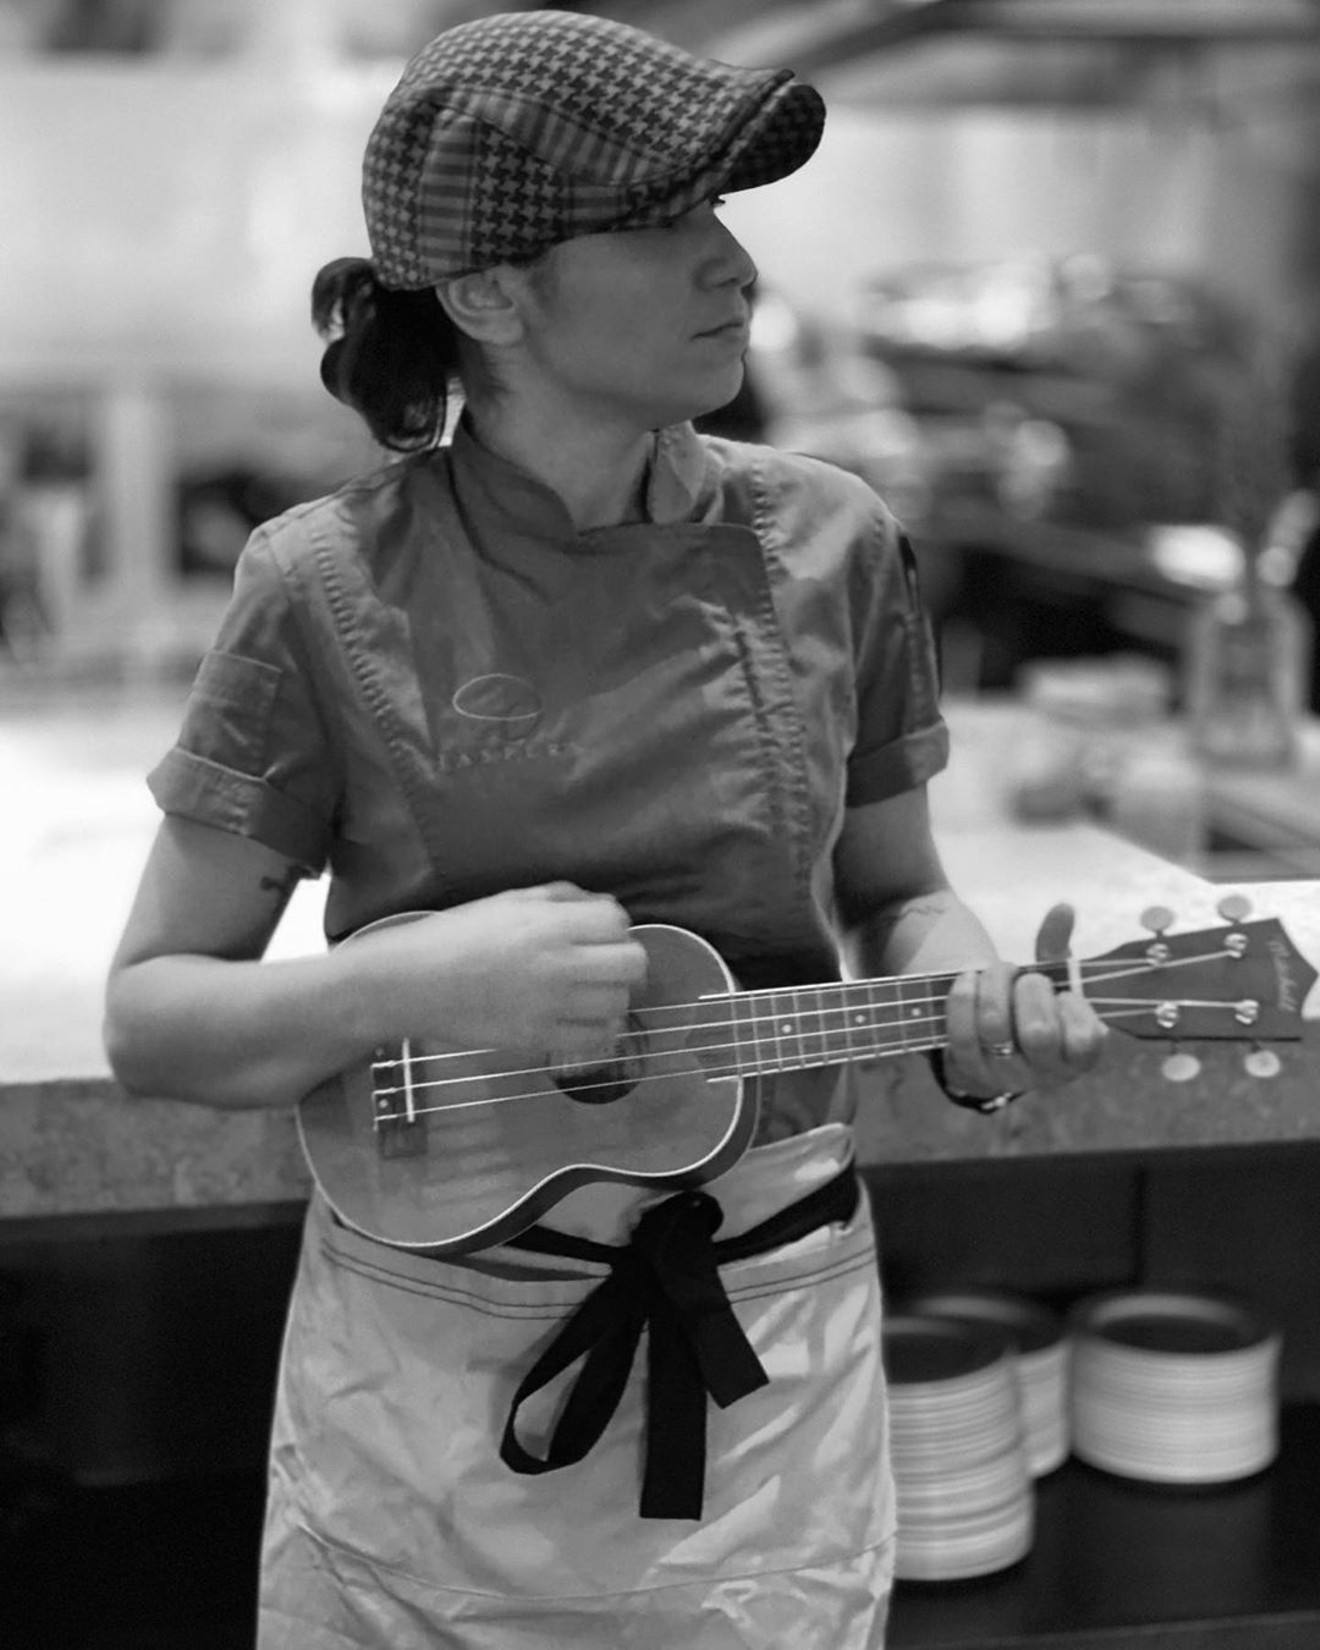 Chef Yia Medina knows how to strum along through the storm.